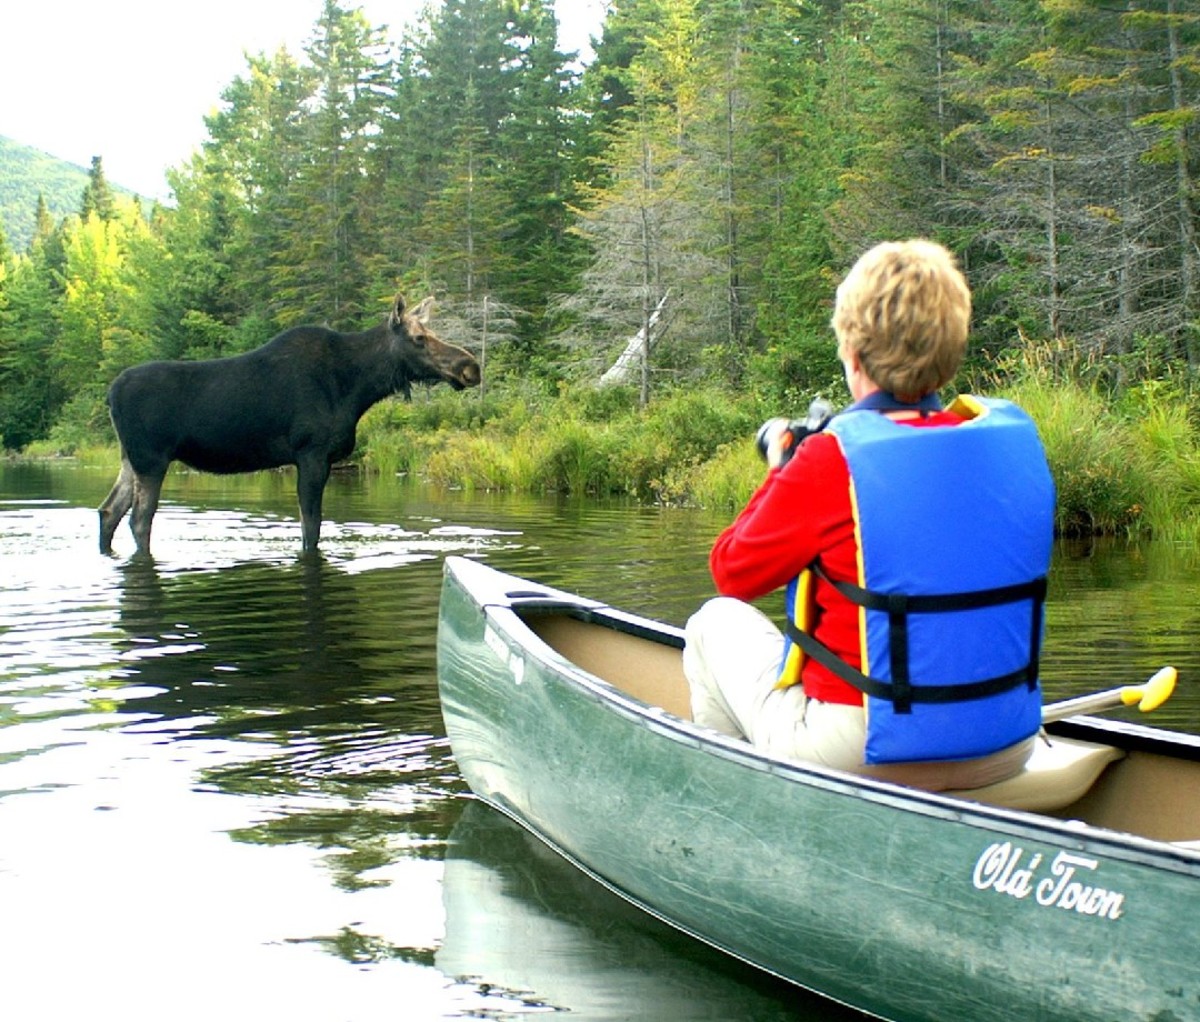 A man in a canoe takes a photo of a very, very close moose.